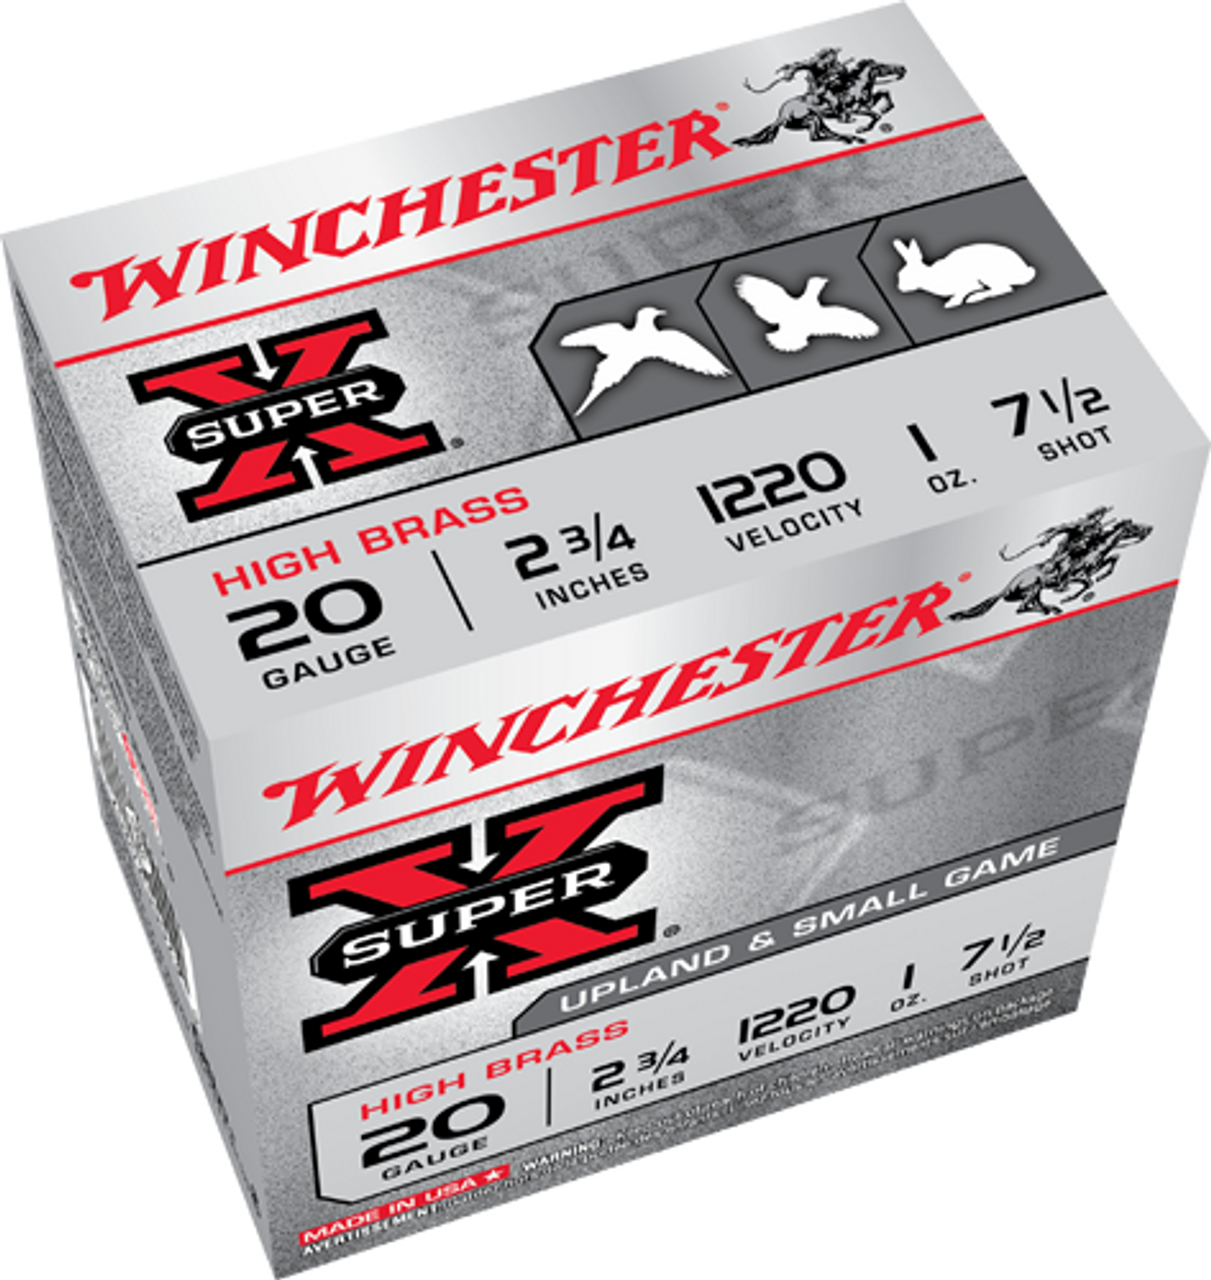 Long-range knock-down. One piece hinged wad for consistent tight patterns and reduced felt-recoil. 209 primer and clean burning powder for reliable ignition and consistent velocity. 25 rounds per box.
Category : Shotshell Lead Loads
Gauge : 20 Gauge
Type : Lead
Length : 2.75"
Ounces : 1 oz
Shot Size : 7.5
Muzzle Velocity : 1220 fps
Rounds Per Box : 25
Application : Hunting
Brass Length Type : High